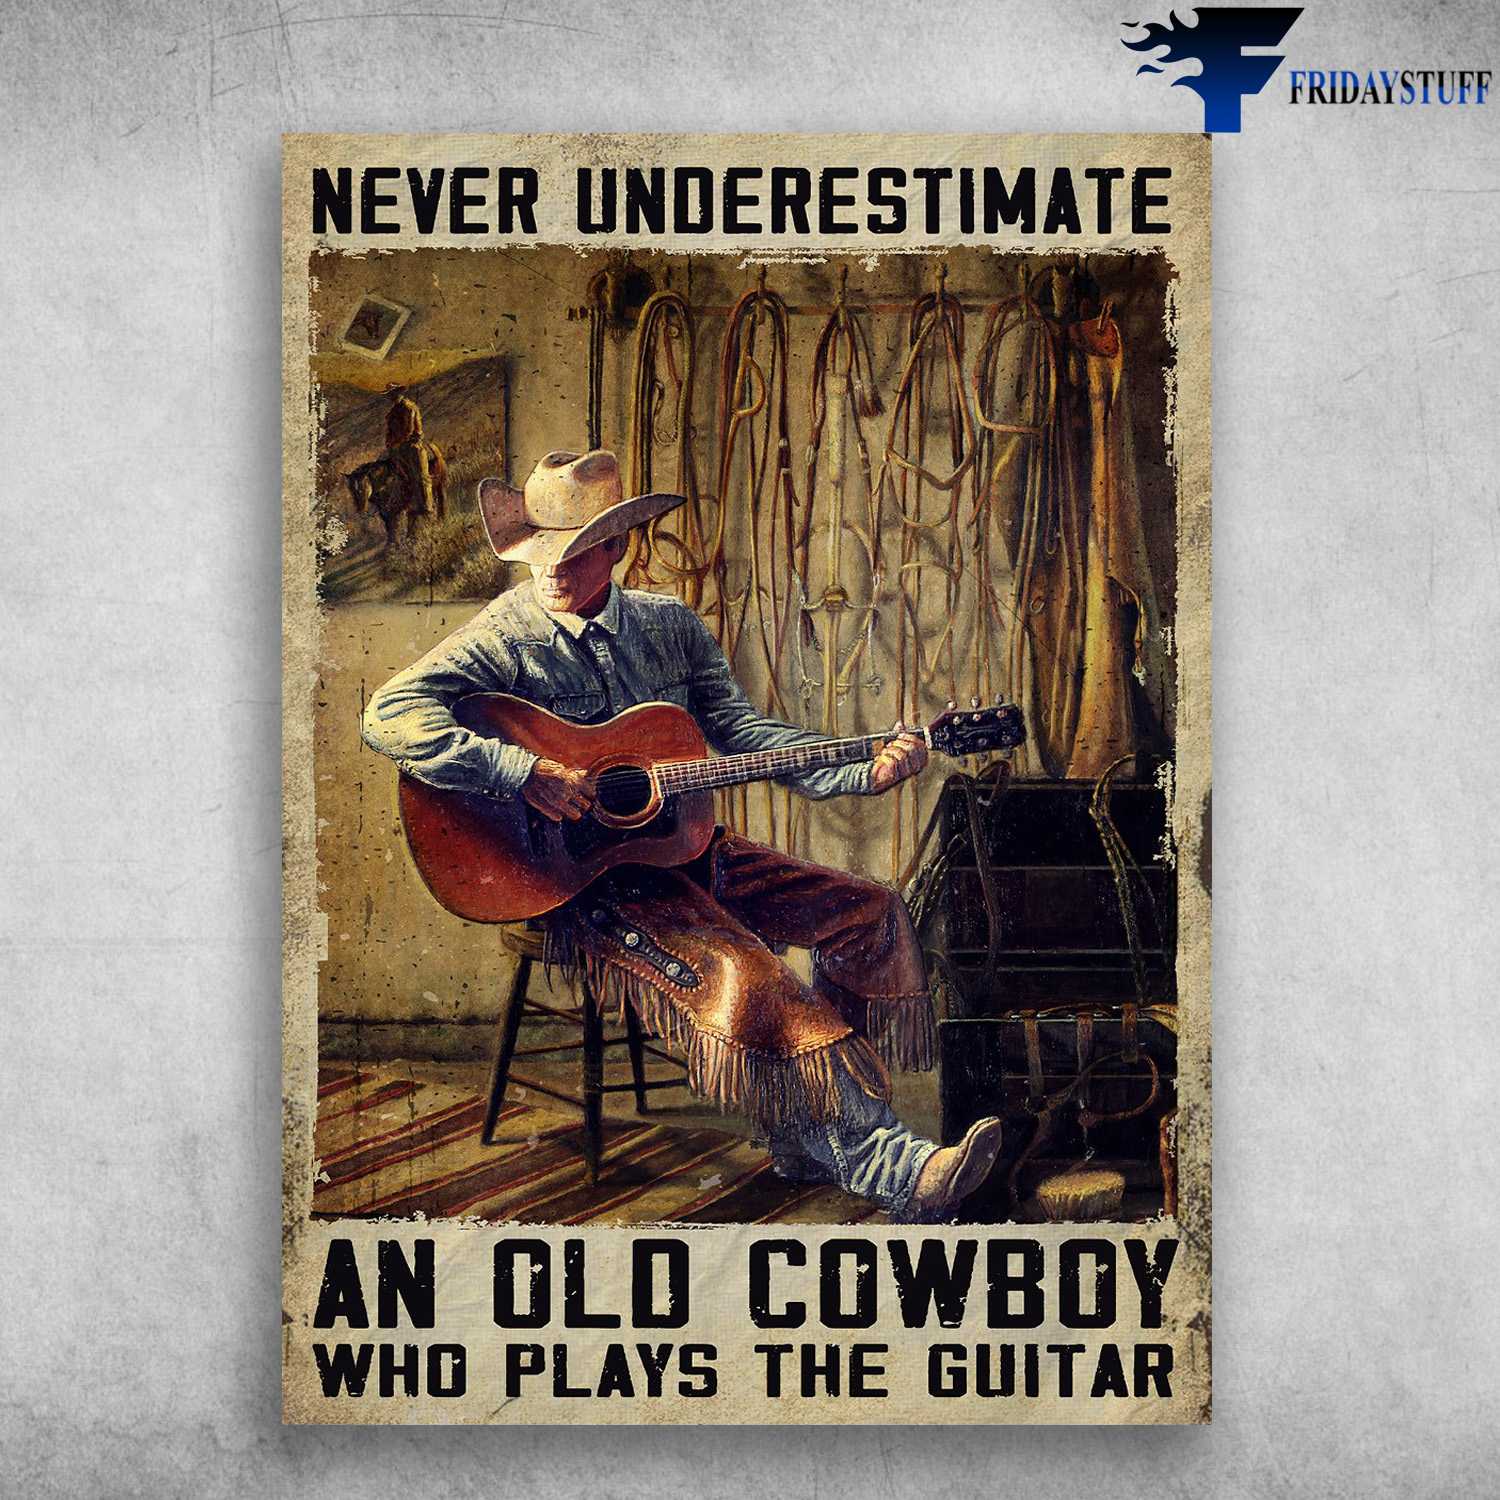 Cowboy Guitar - Never Underestimate, An Old Cowboy, Who Plays The Guitar